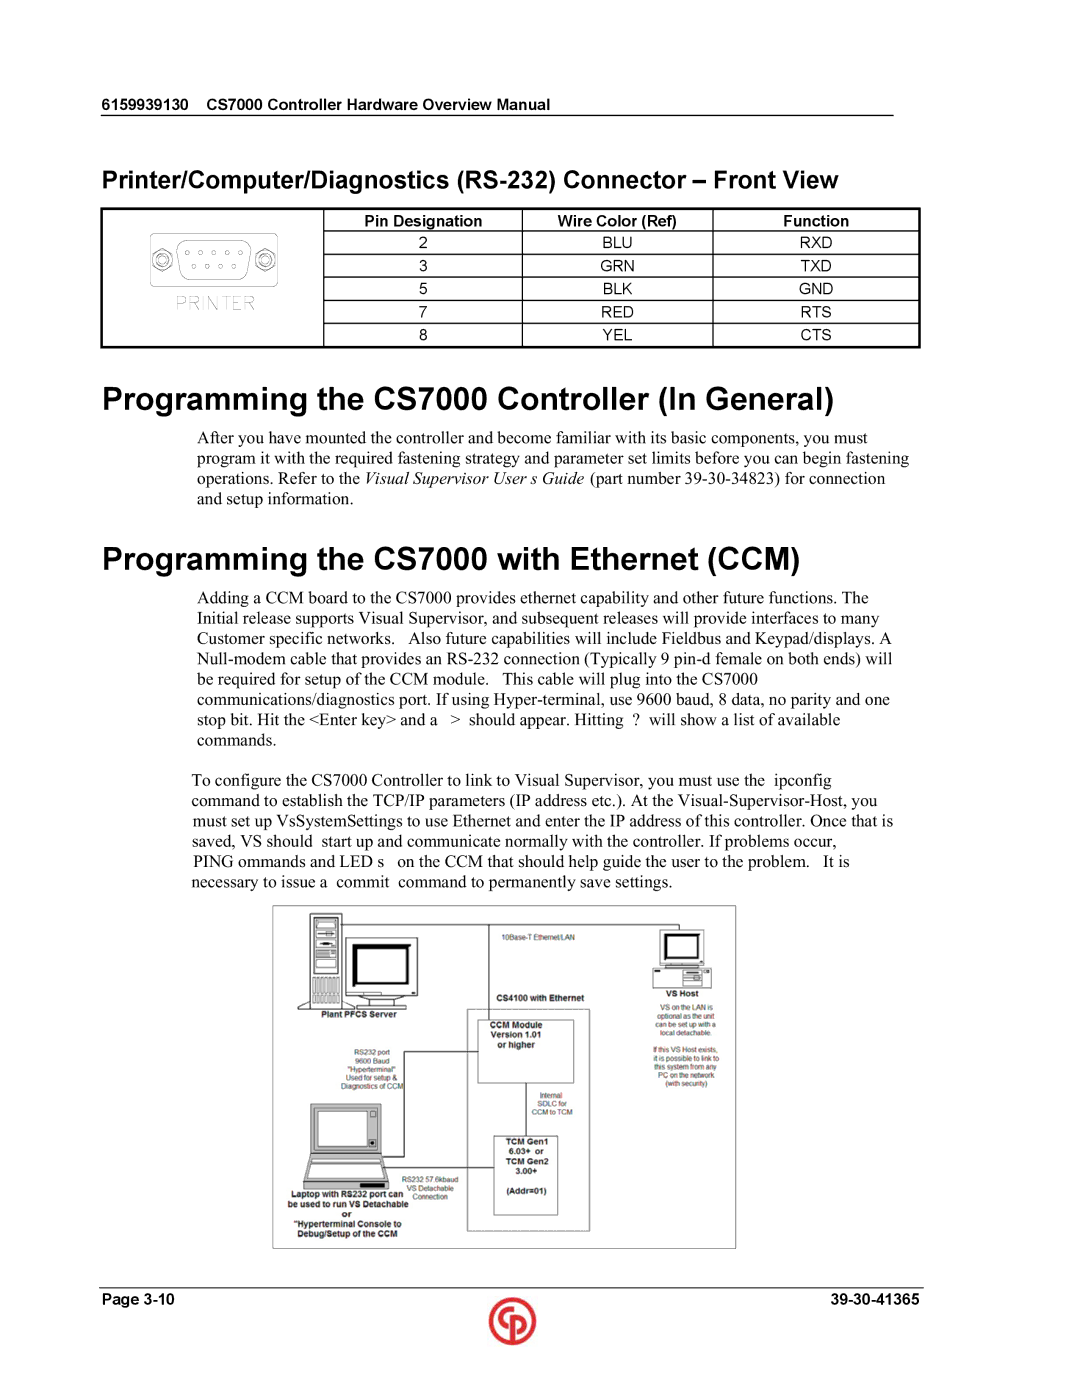 Chicago Pneumatic manual Programming the CS7000 Controller In General, Programming the CS7000 with Ethernet CCM 